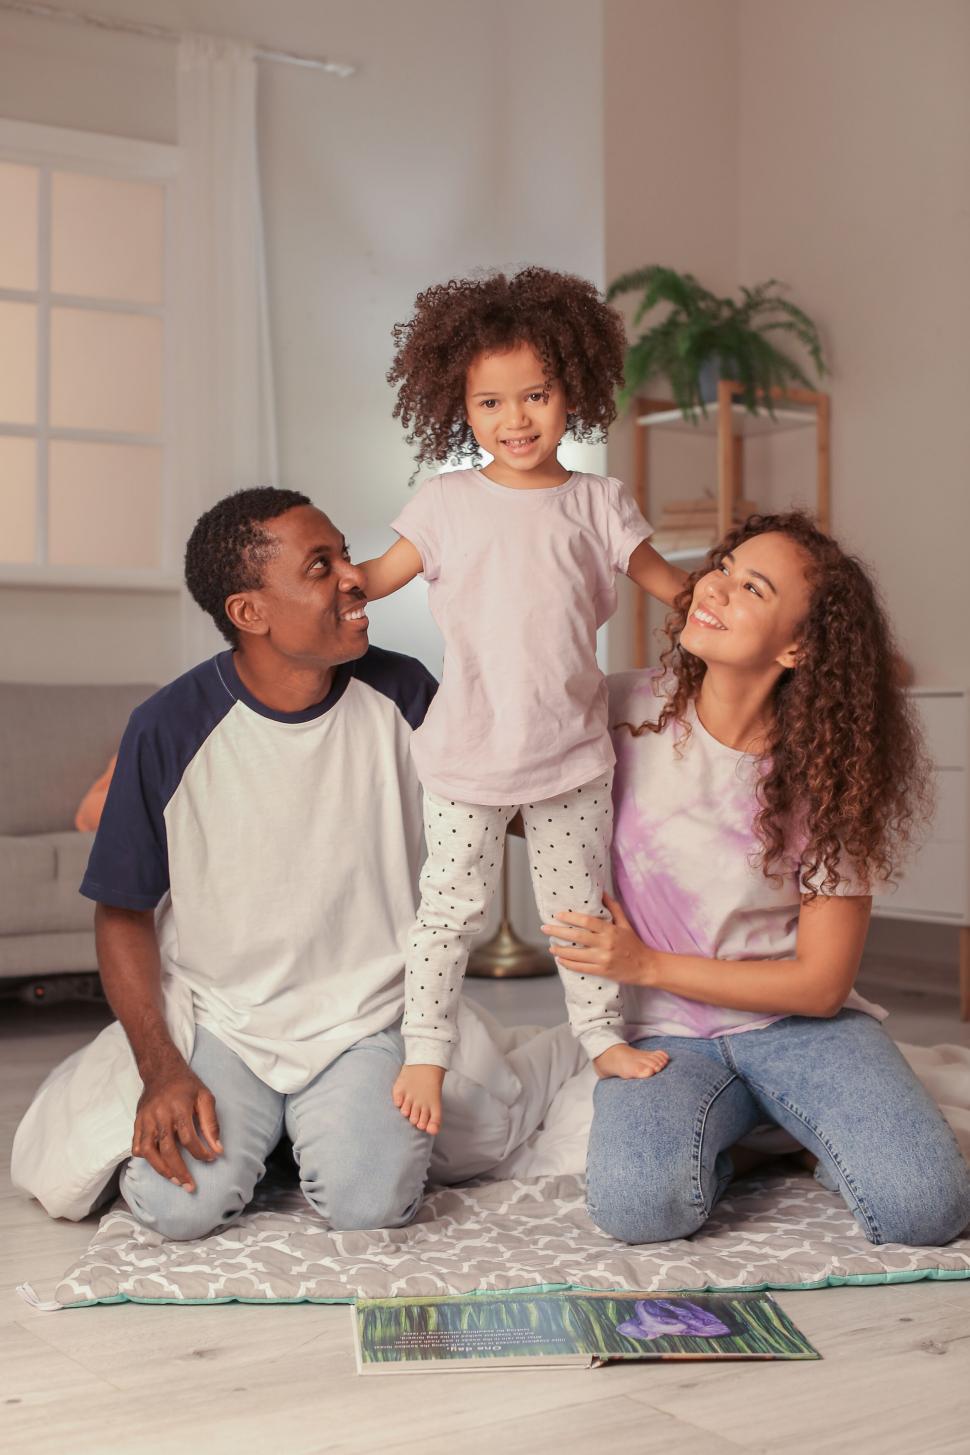 Free Image of Family enjoying time at home together 